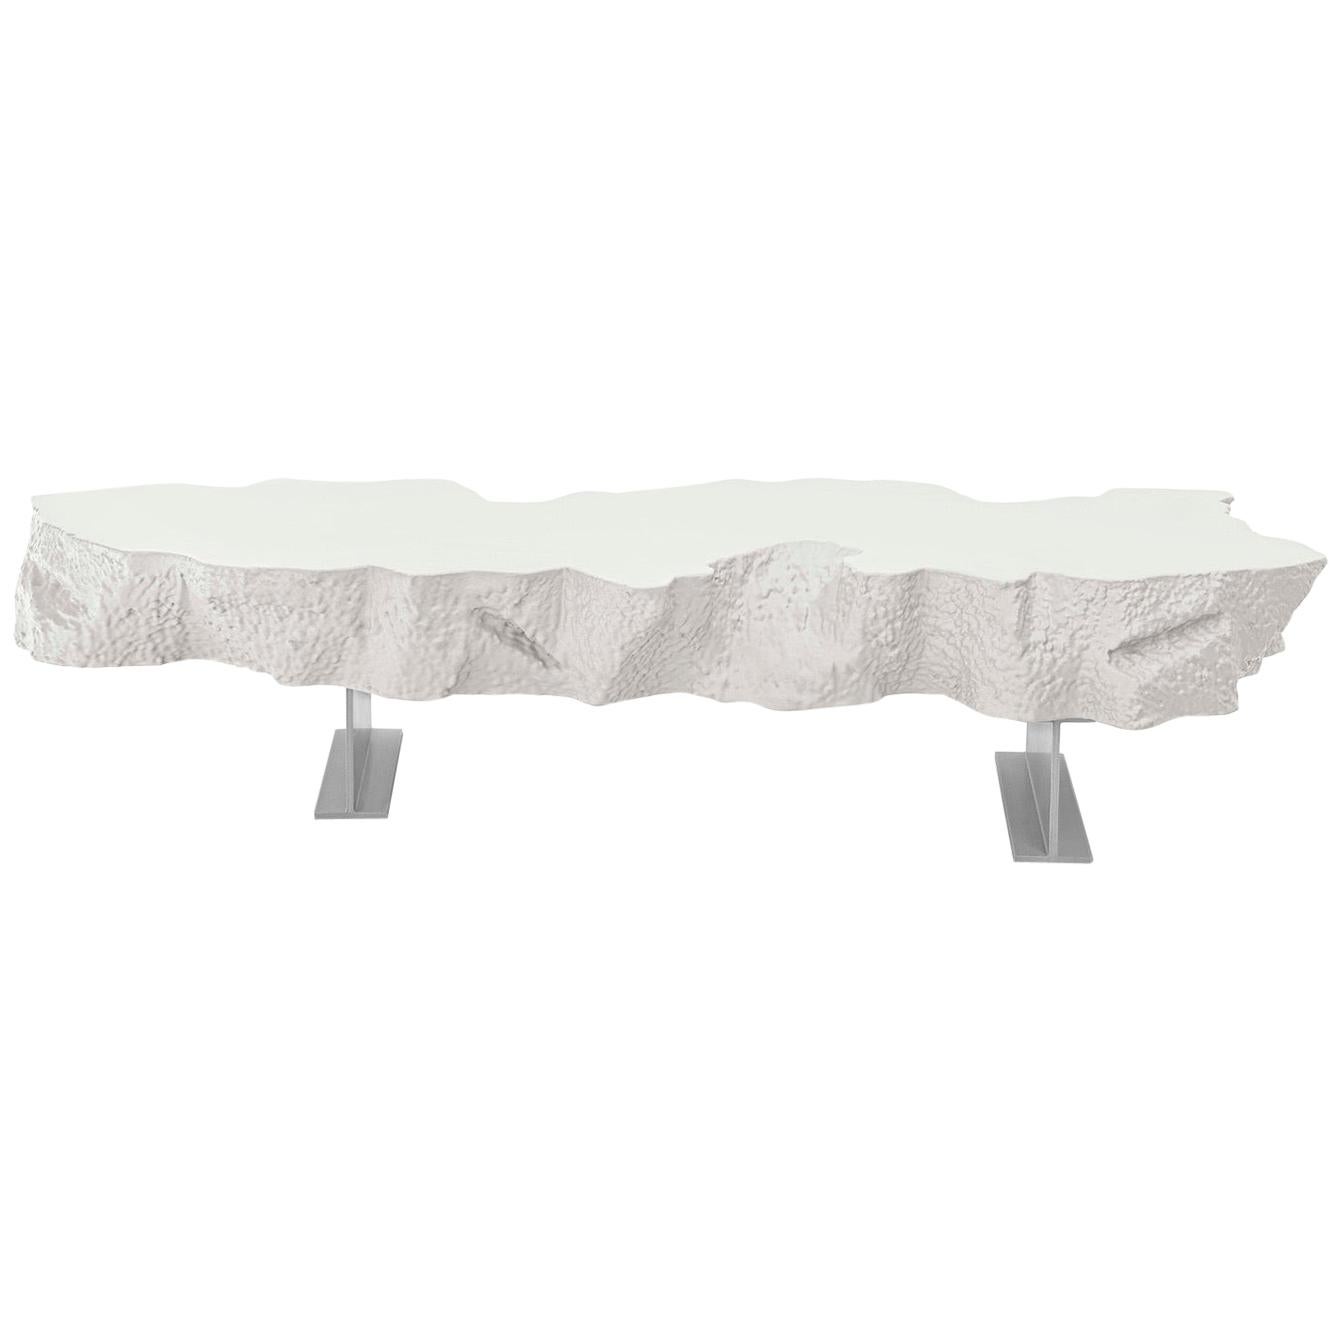 Gufram Broken Bench White by Snarkitecture, Limited Edition of 77 For Sale